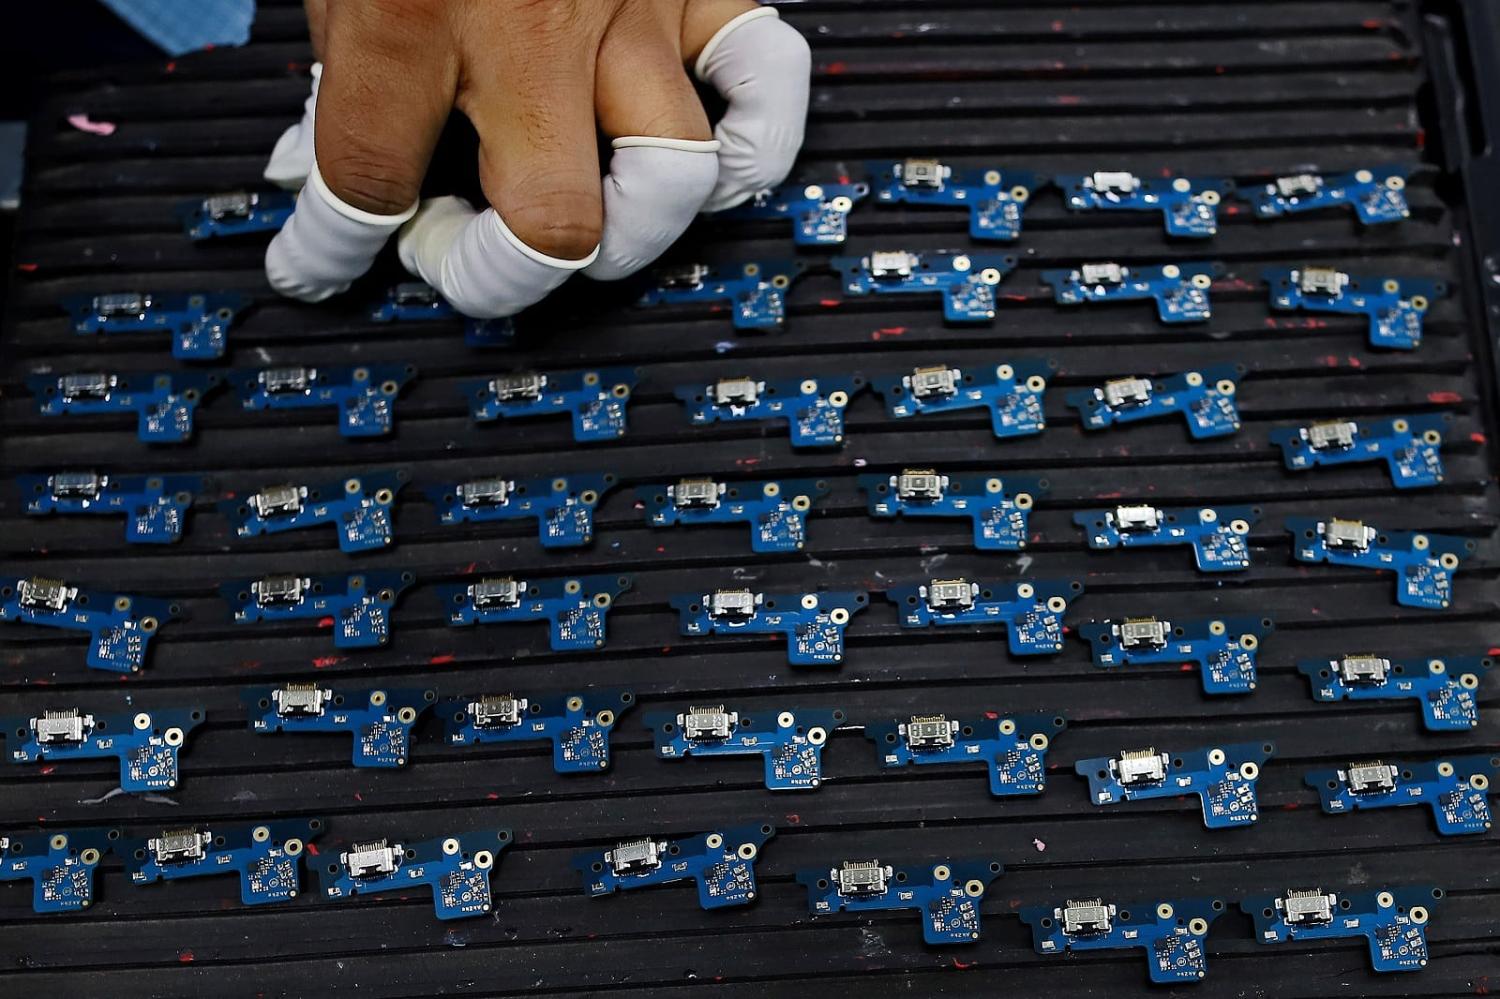 Components for smartphones on an assembly line in Noida, Uttar Pradesh, India, 28 January 2021 (Anindito Mukherjee/Bloomberg via Getty Images)